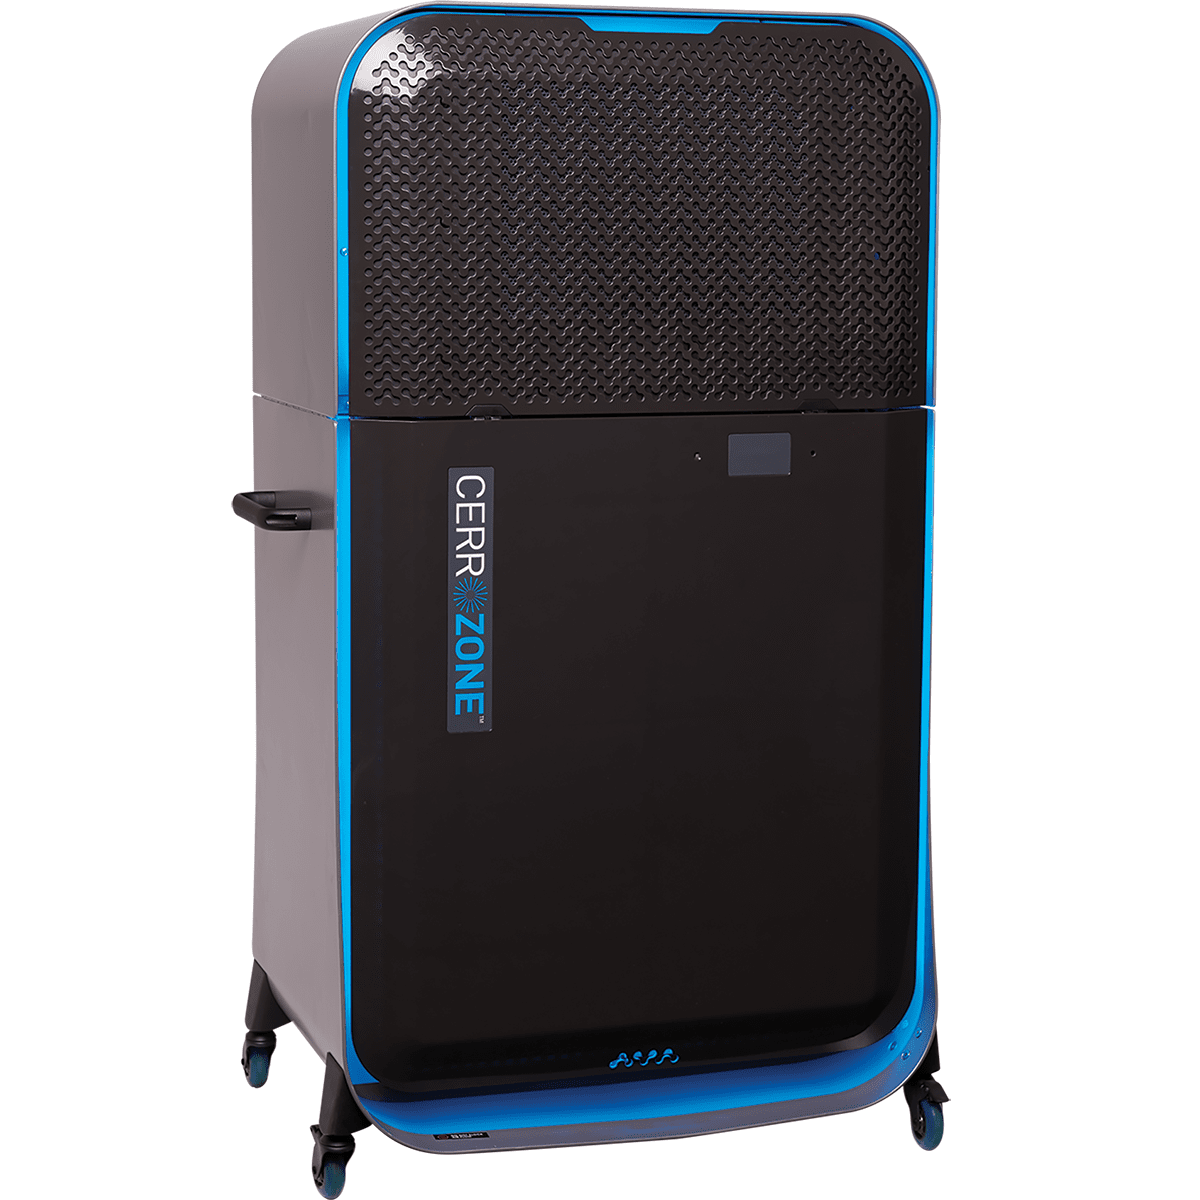 CerroZone FDA Class II Sanitizing Mobile Indoor Commercial Air Purification System